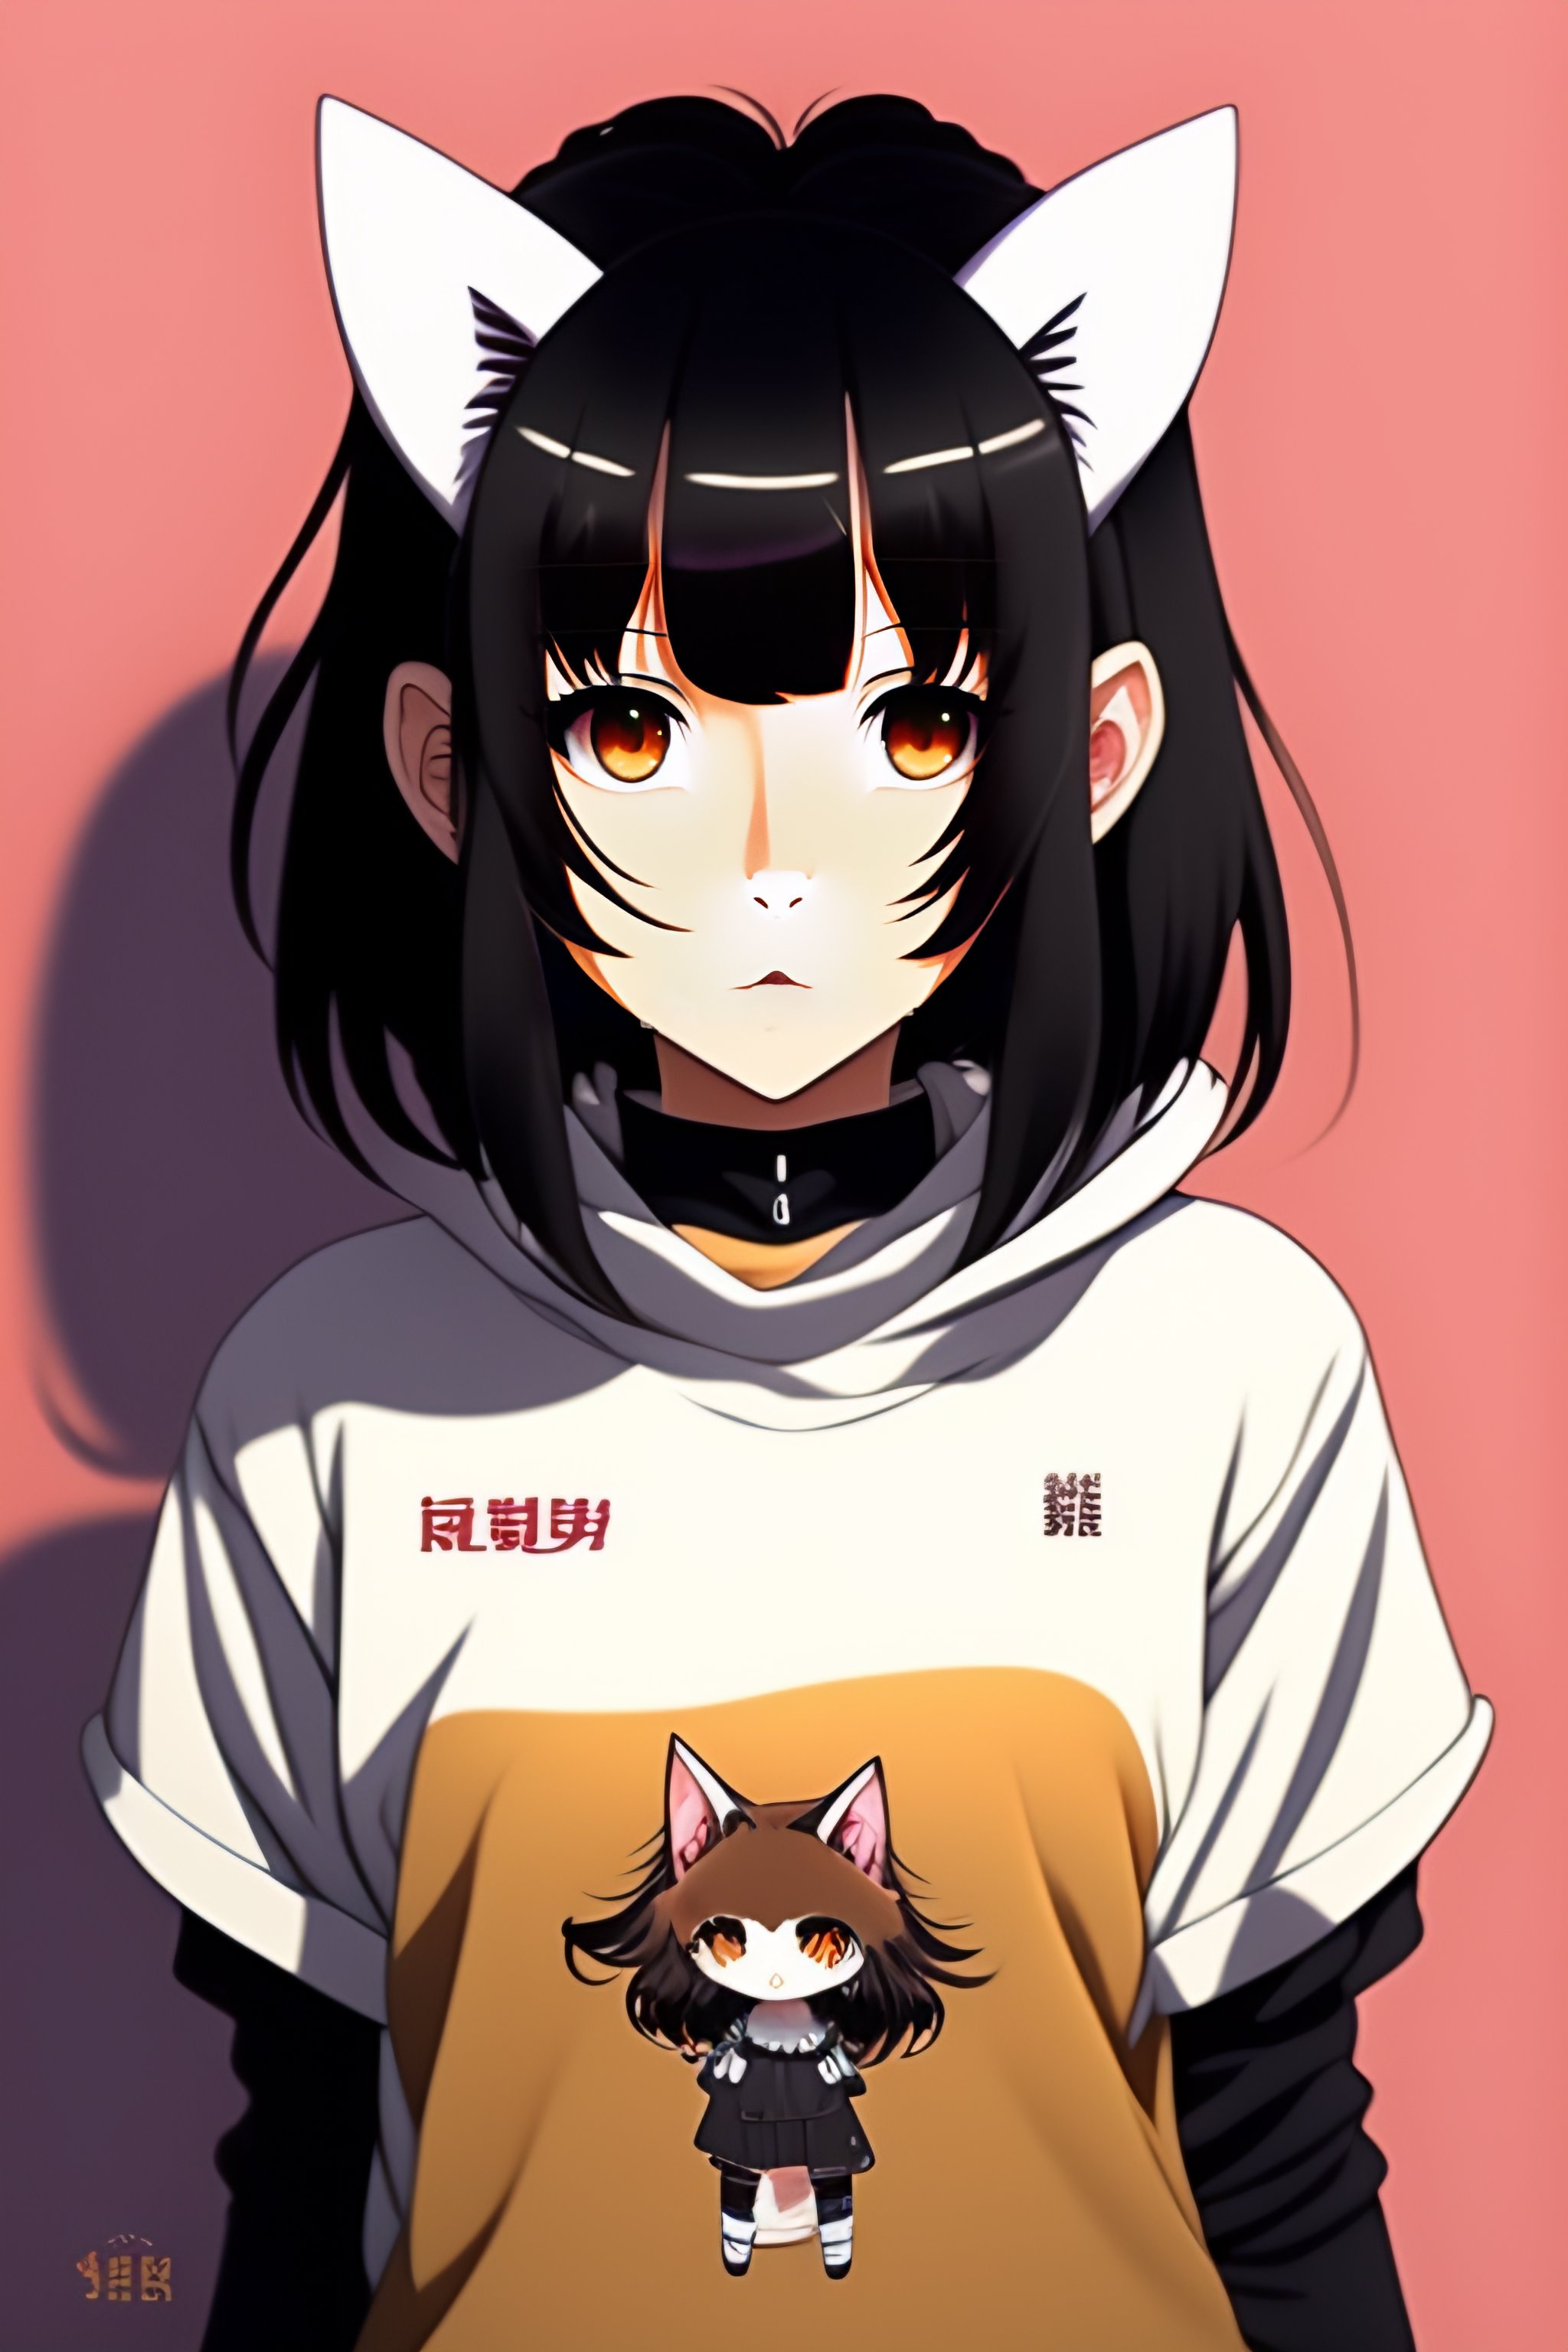 anime, anime cat and soft - image #6428637 on, icon cat anime